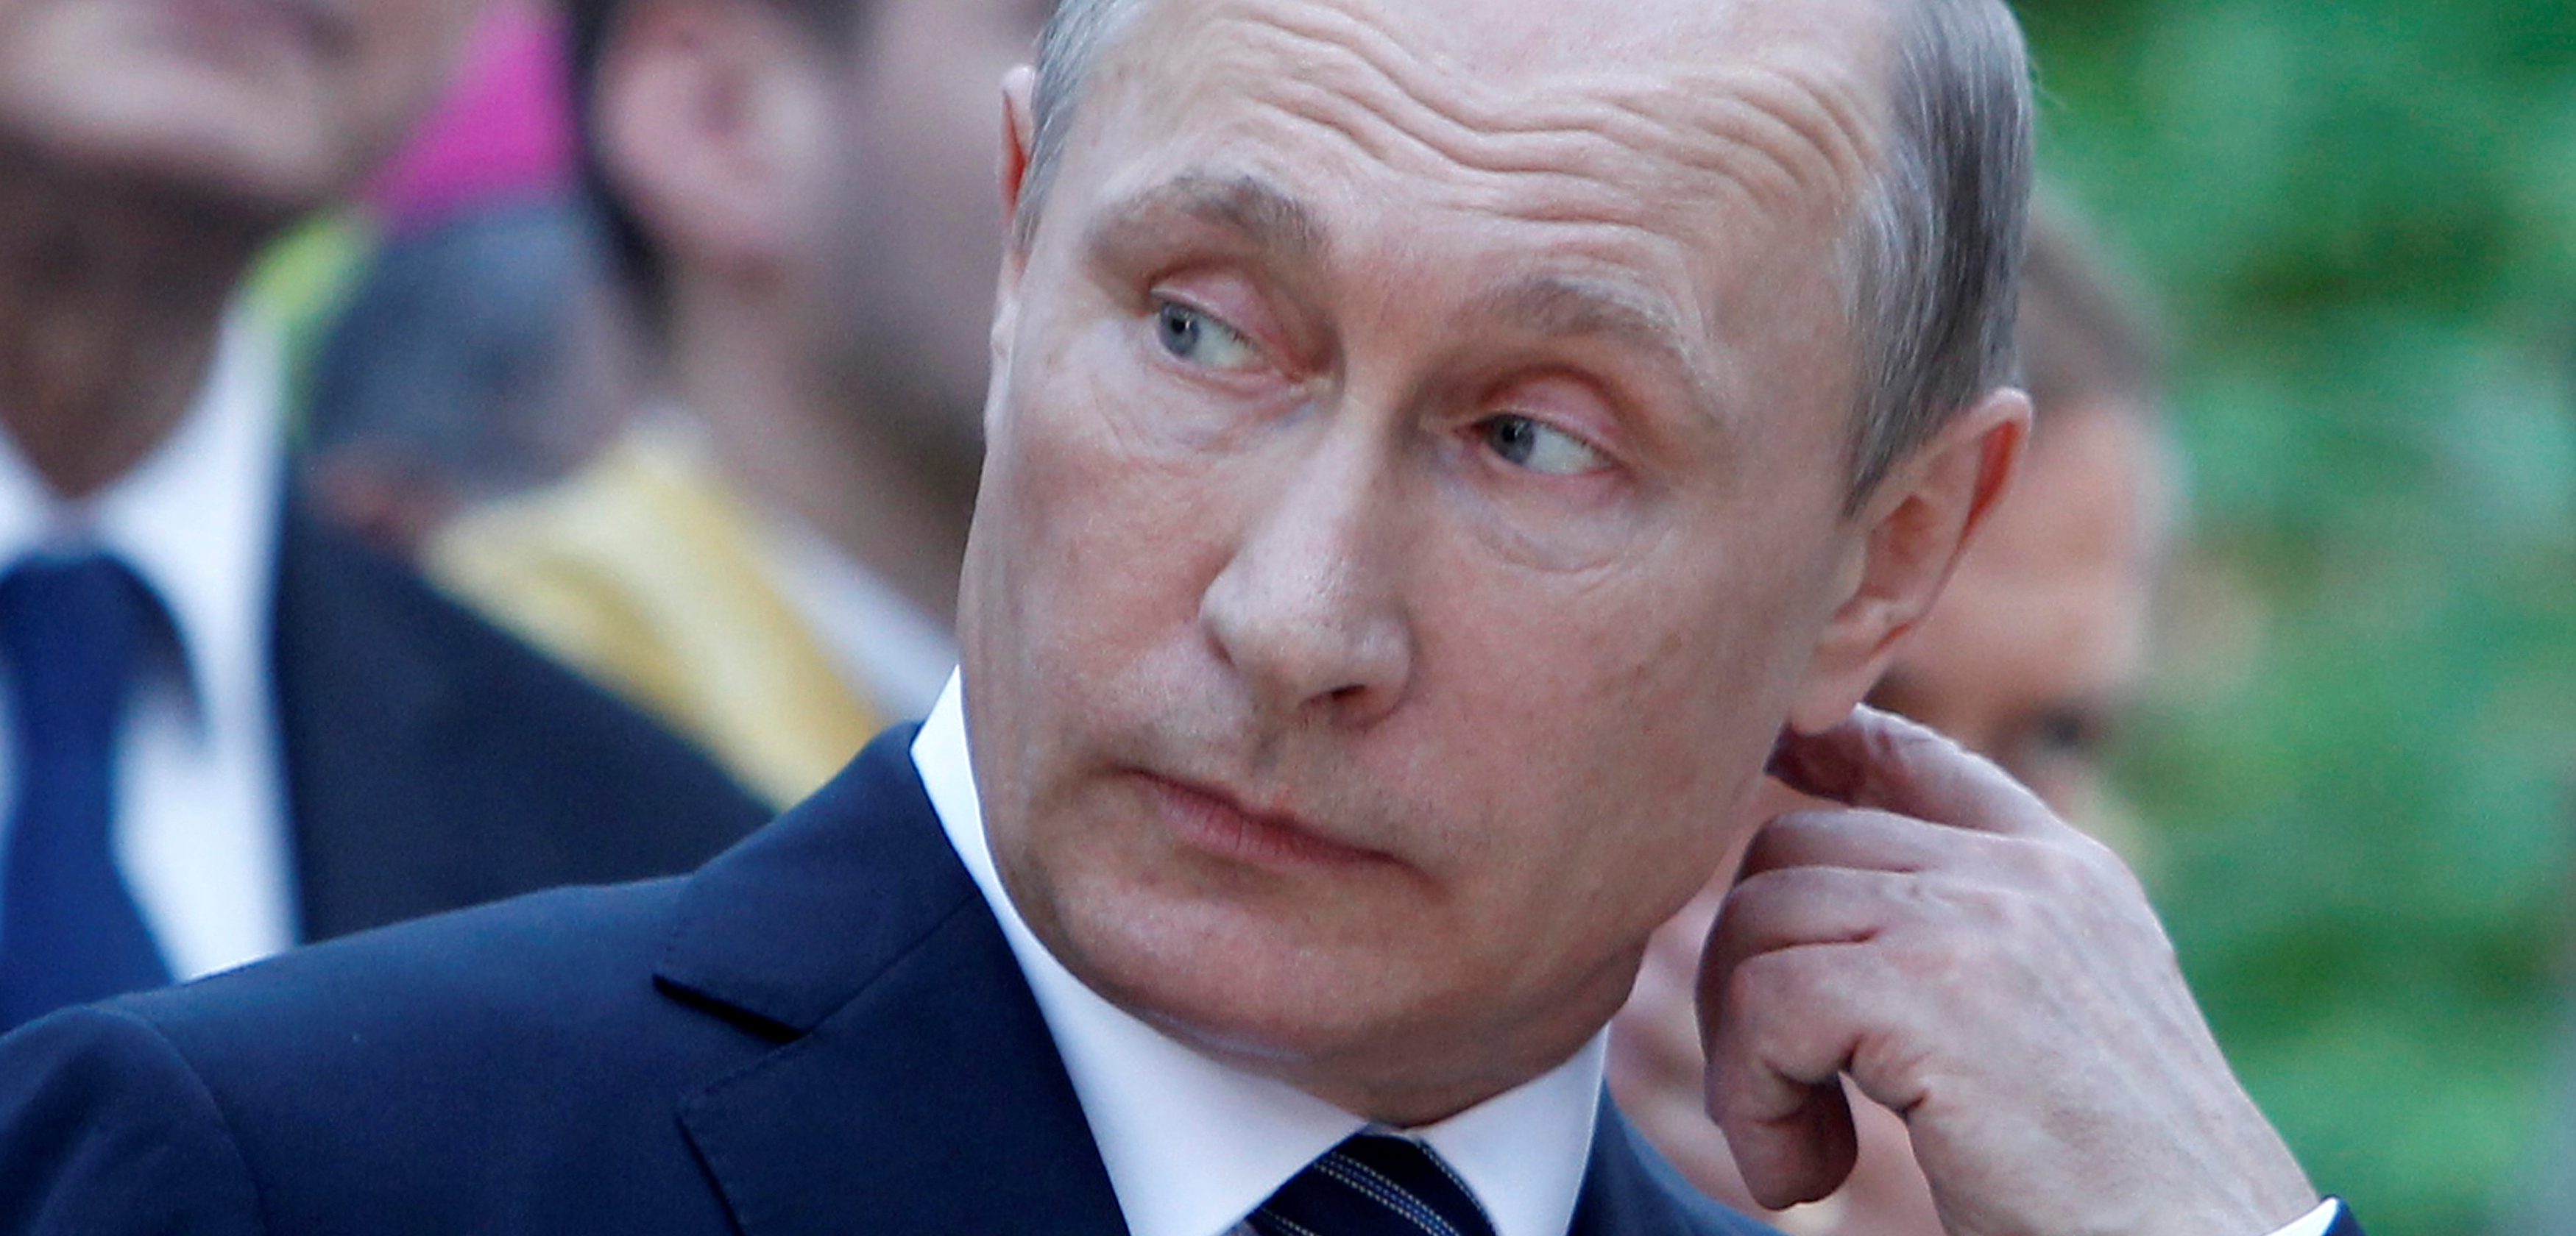 3 Reasons Russia S Vladimir Putin Might Want To Interfere In The U S